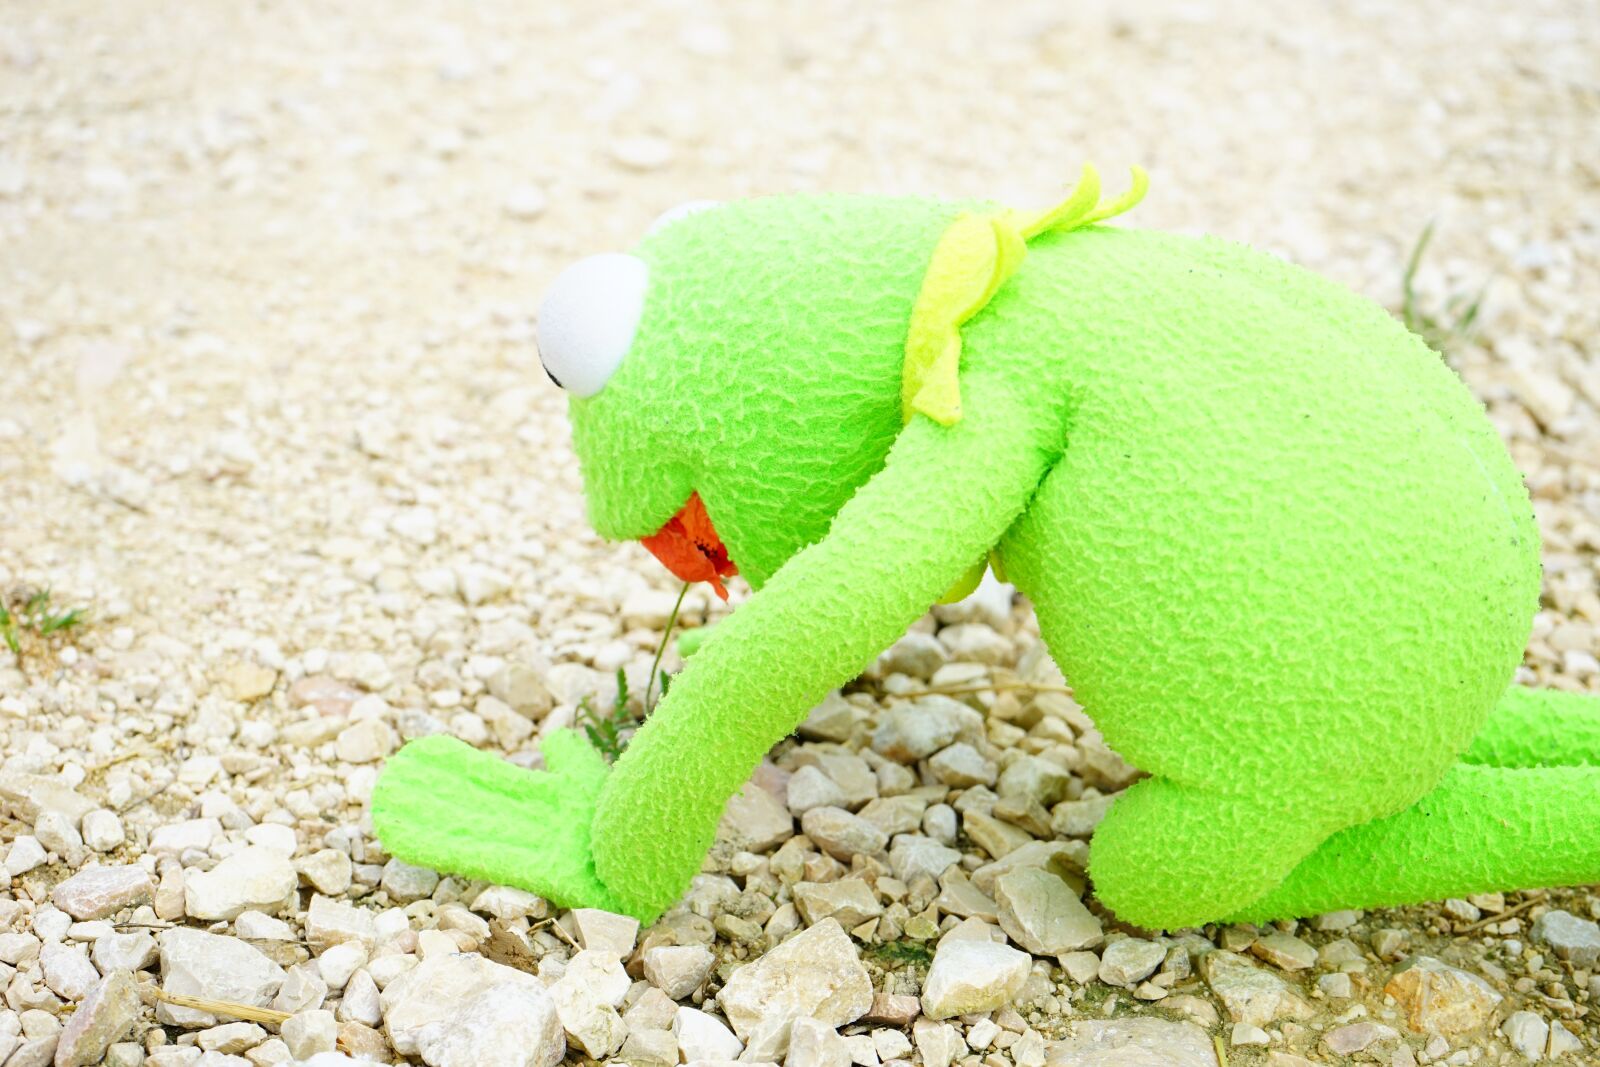 Sony a7 sample photo. Kermit, frog, hunger photography